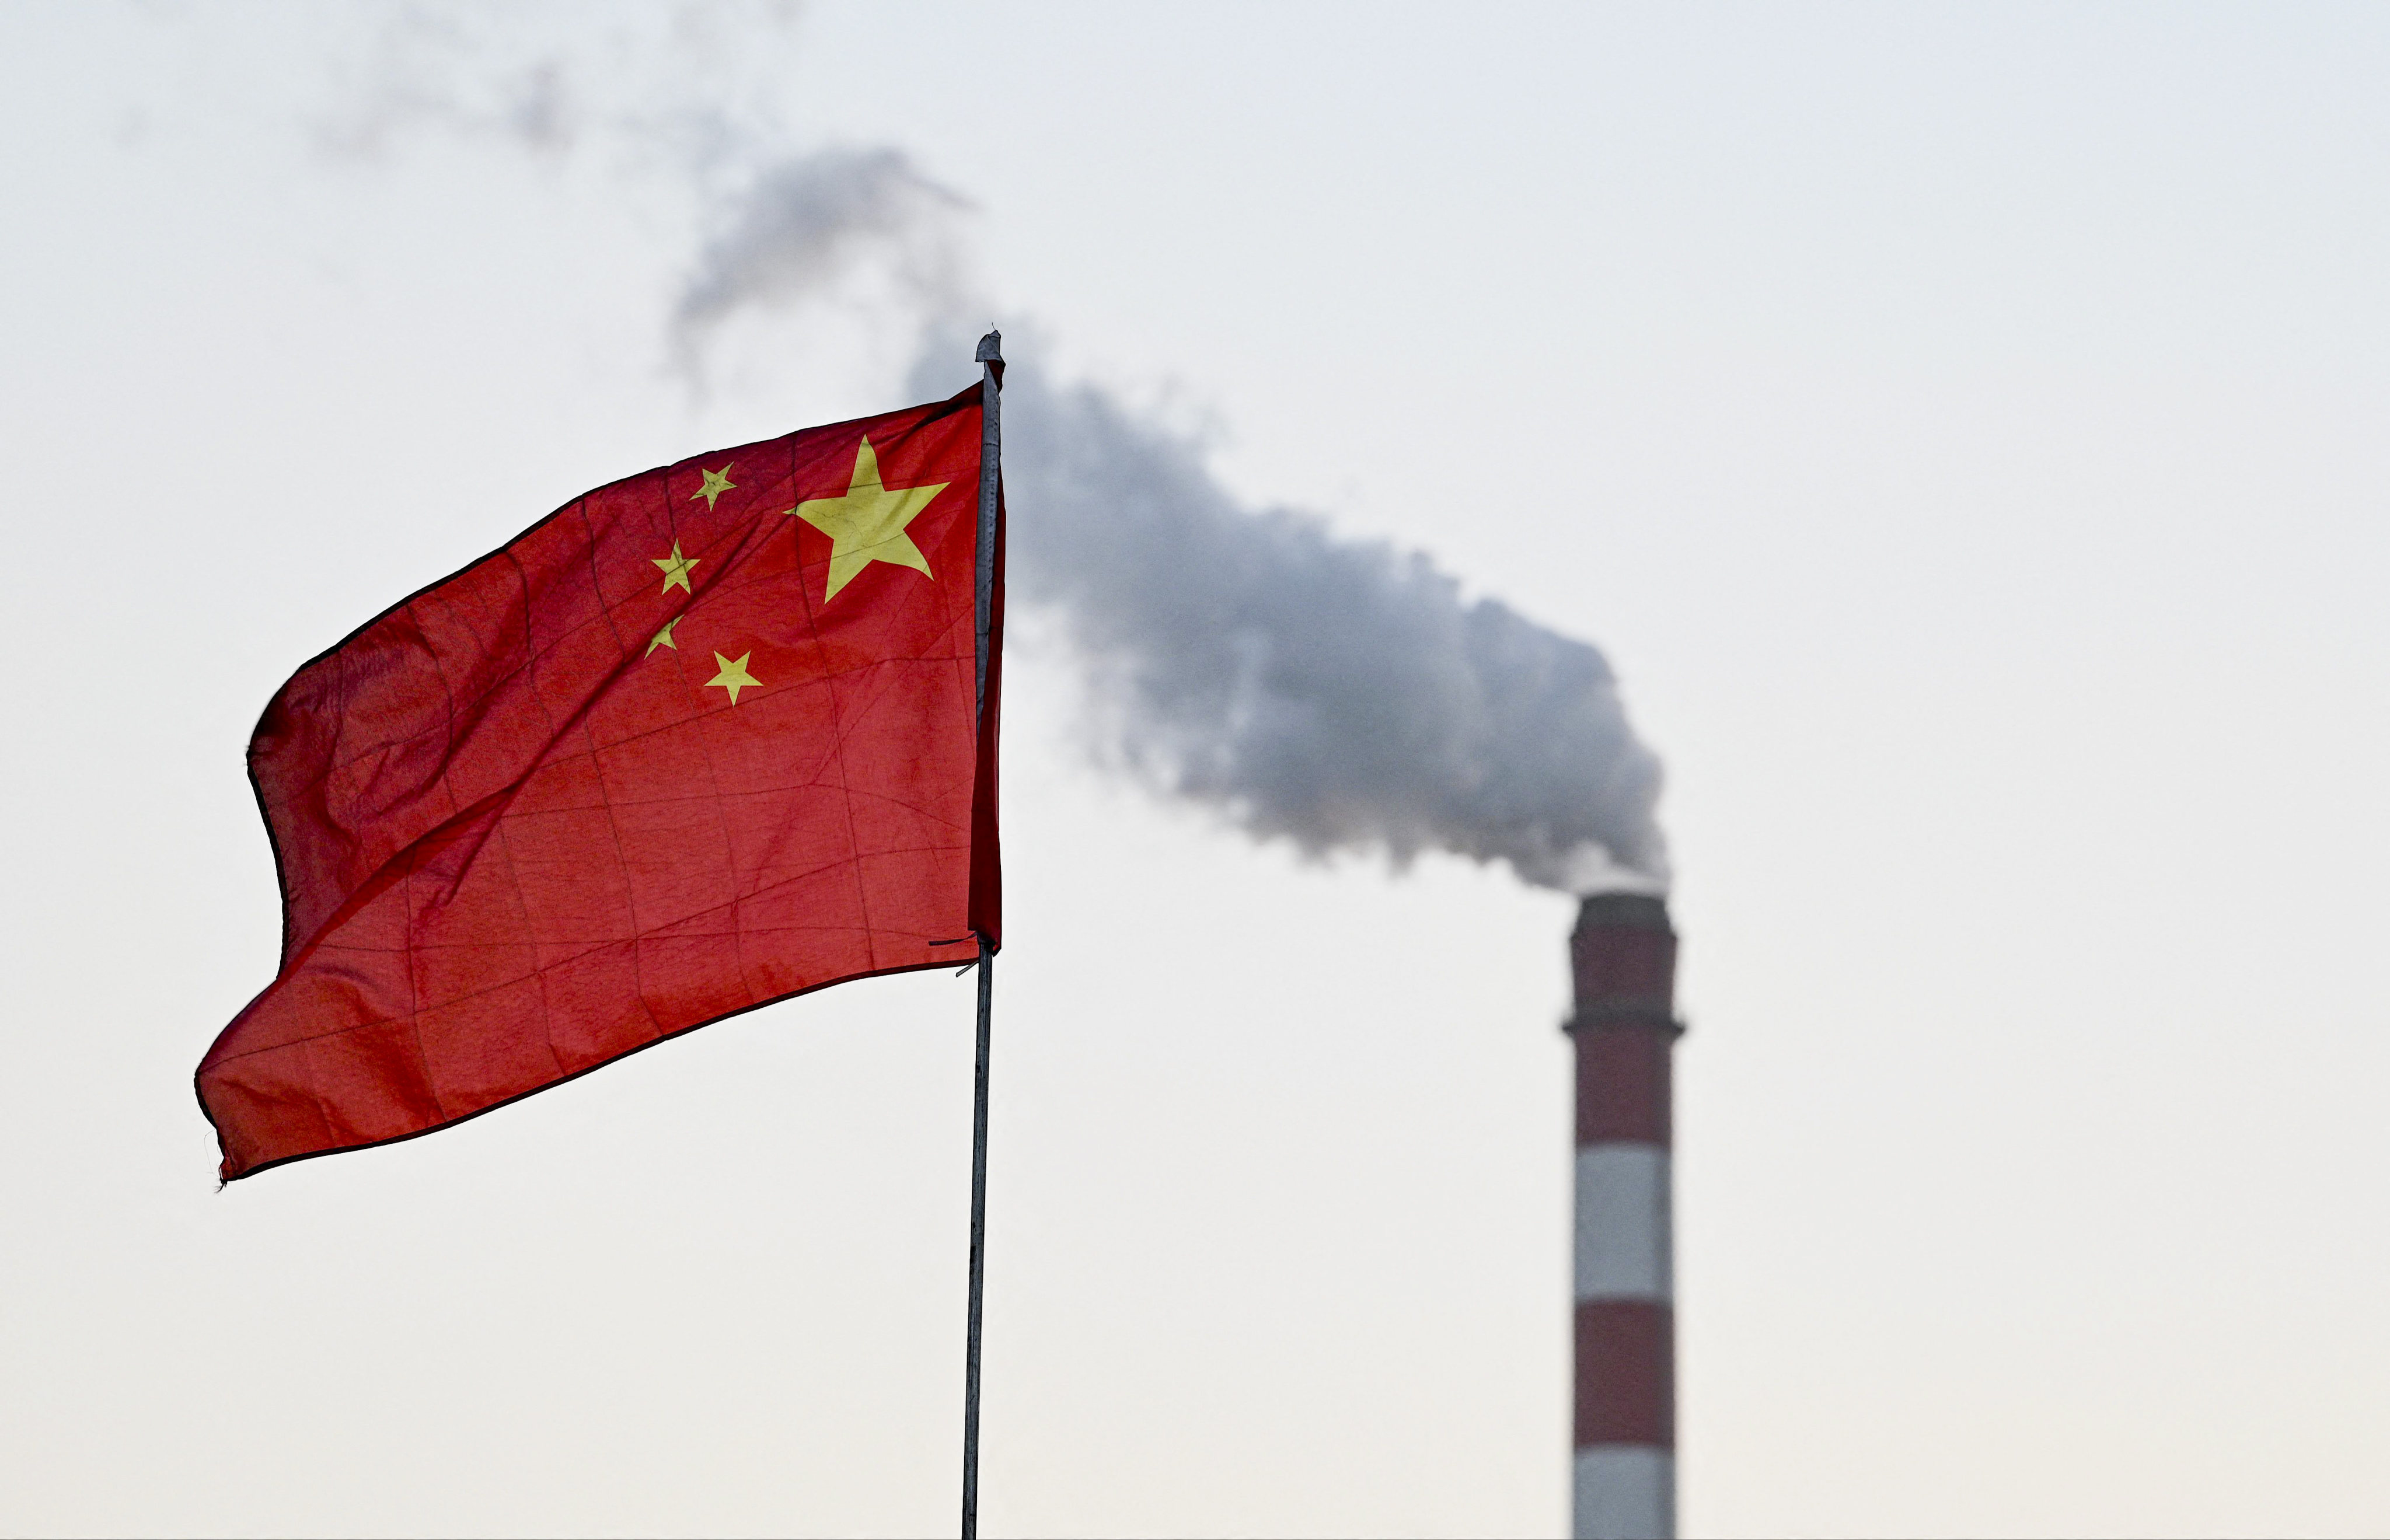 China’s national flag flutters in front of a coal-powered power station in Datong, in China’s northern Shanxi province on November 3, 2021. Photo: AFP